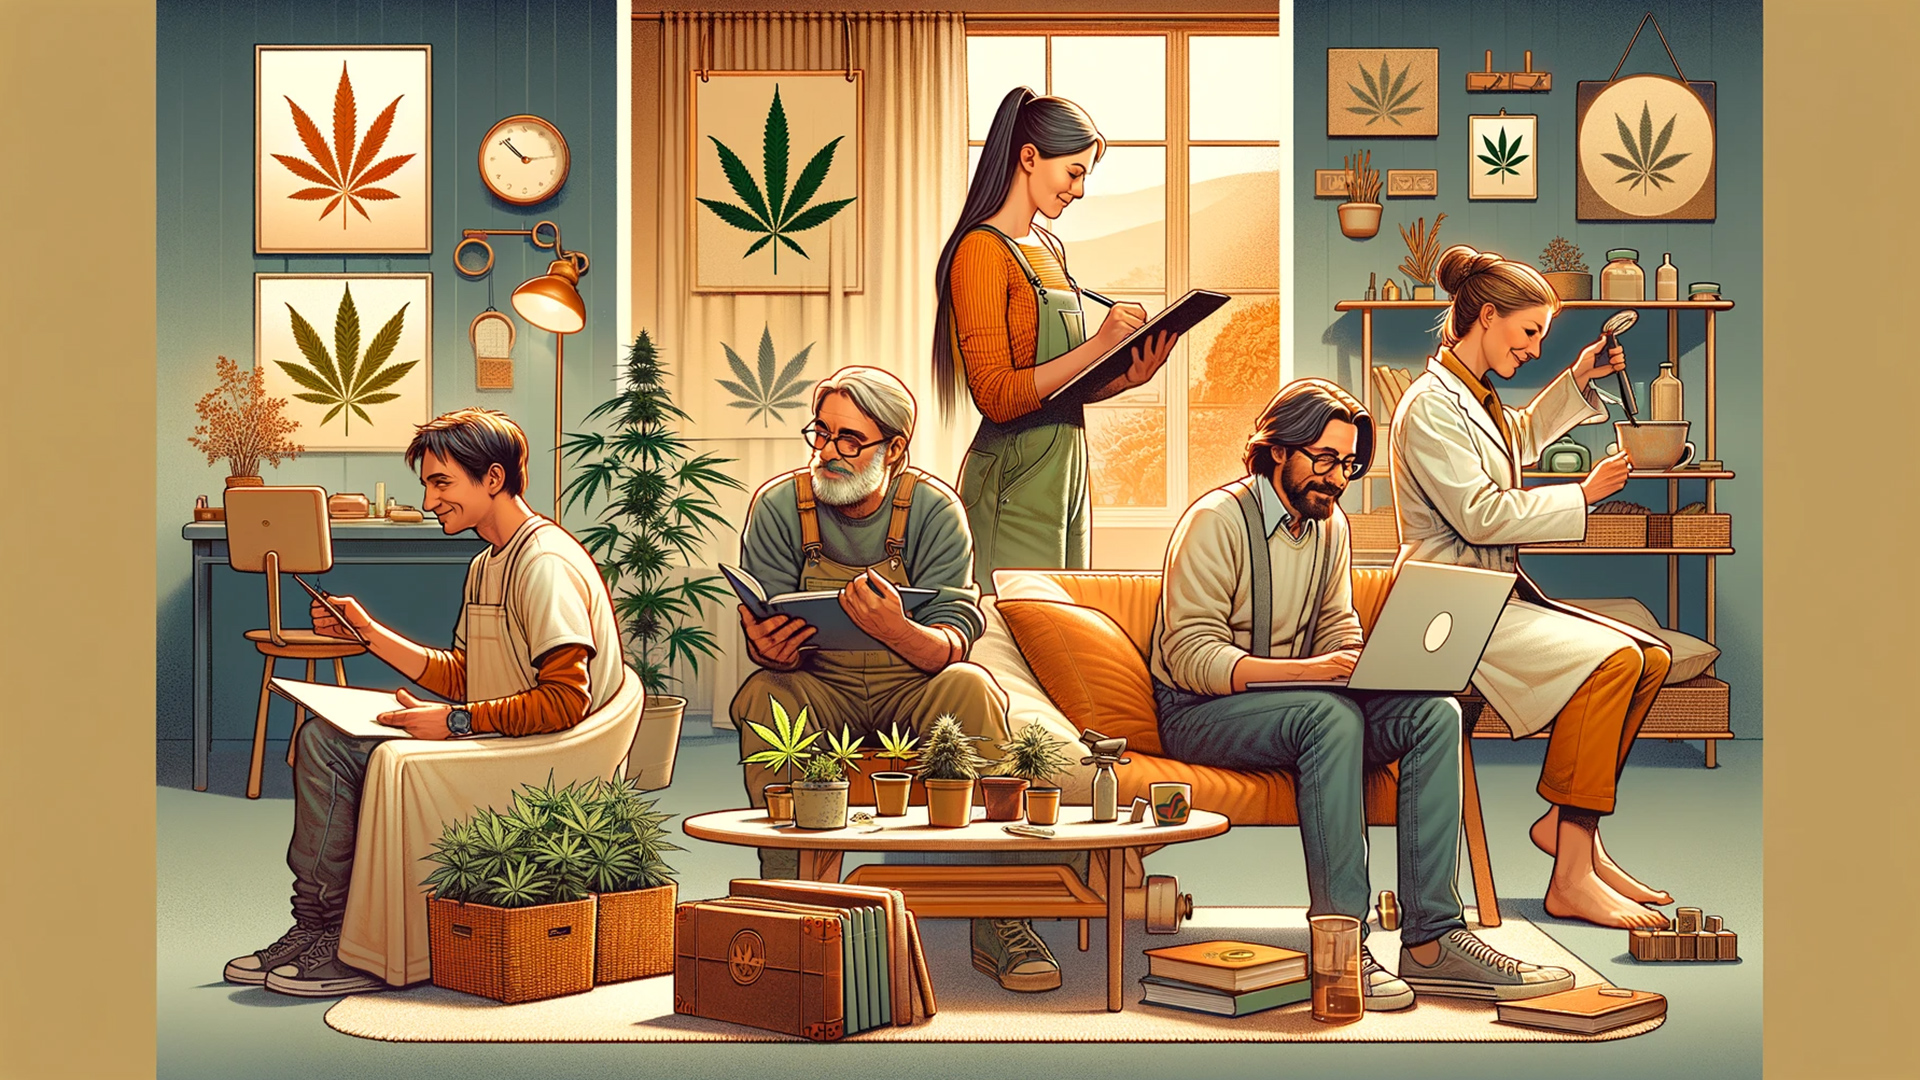 A cozy living room scene with four diverse individuals engaging in cannabis-related activities, symbolizing community and varied experiences.